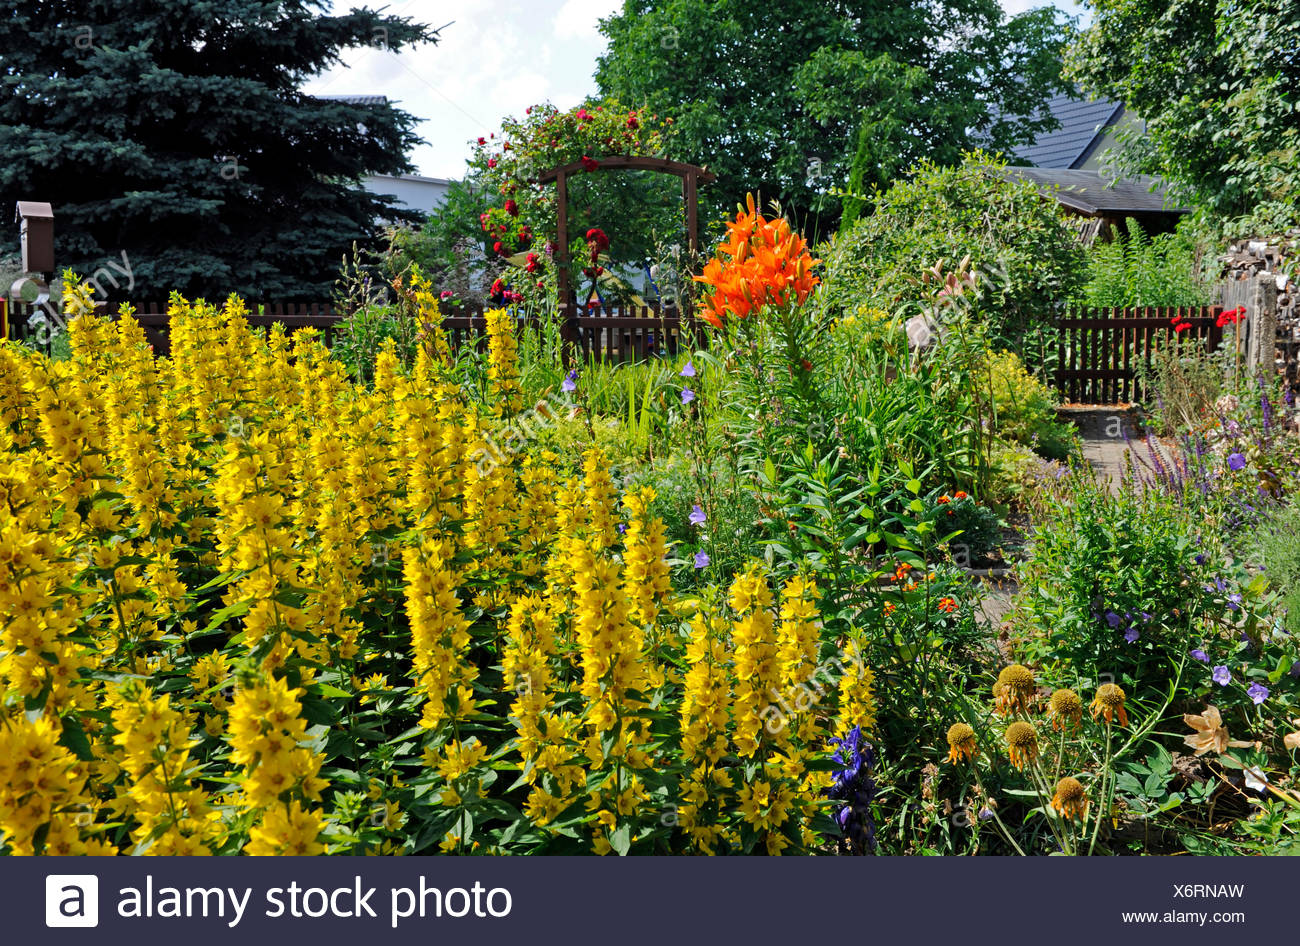 Of Romantic Cottage Gardens With Blossoming Summer Flowers And